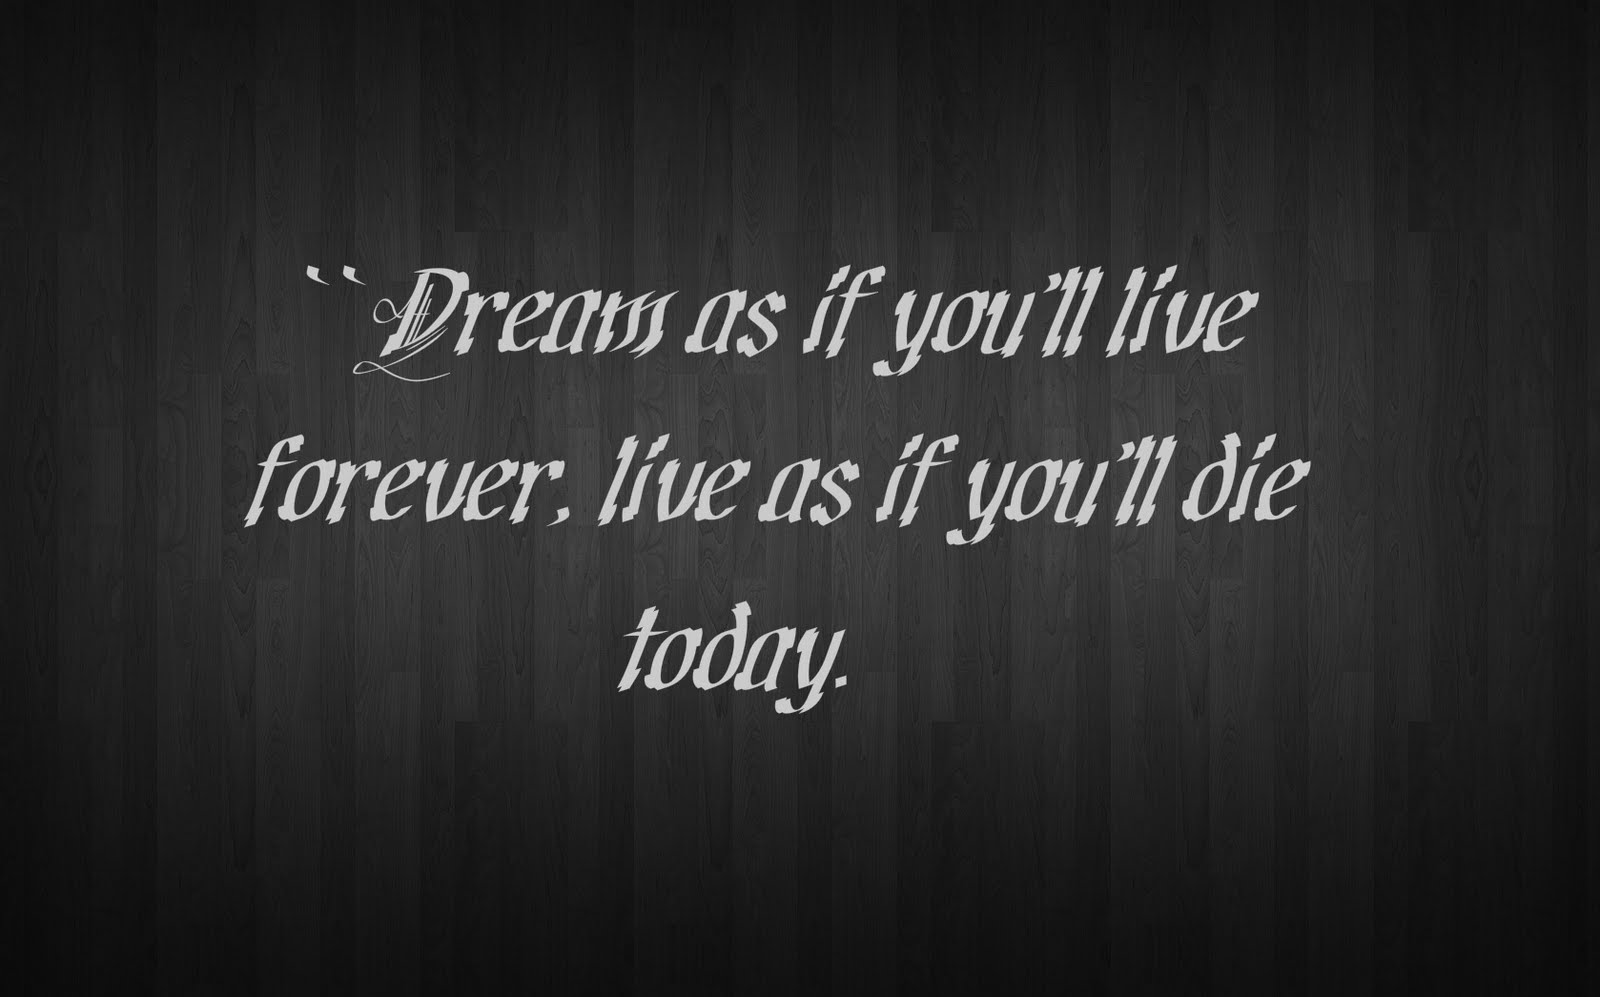 Dream as if youll live